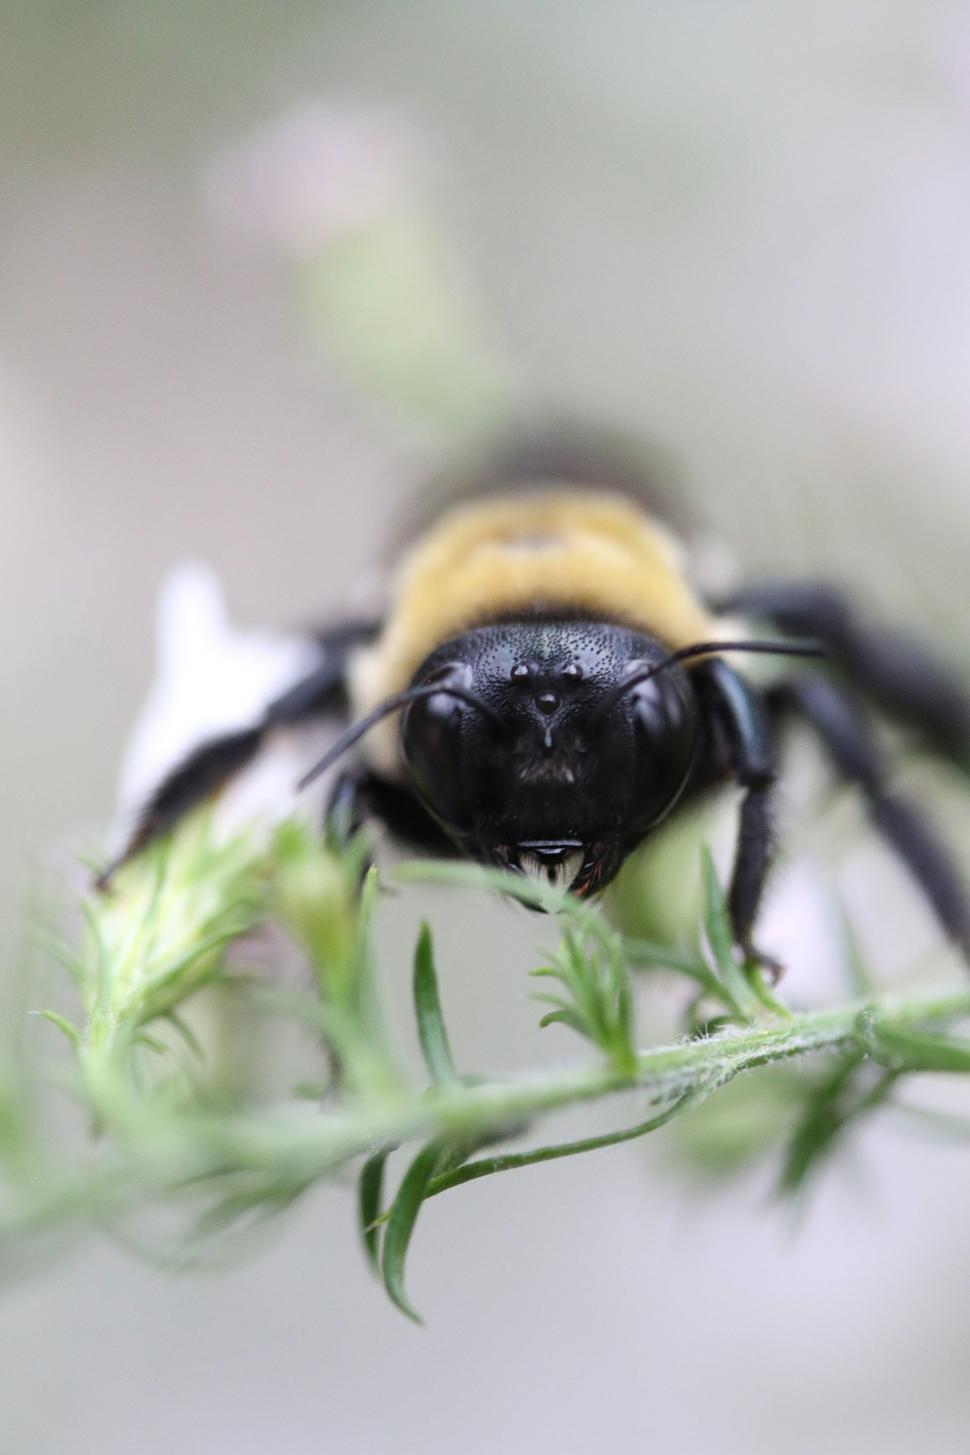 Free Image of Close Up of a Black and Yellow Insect on a Plant 